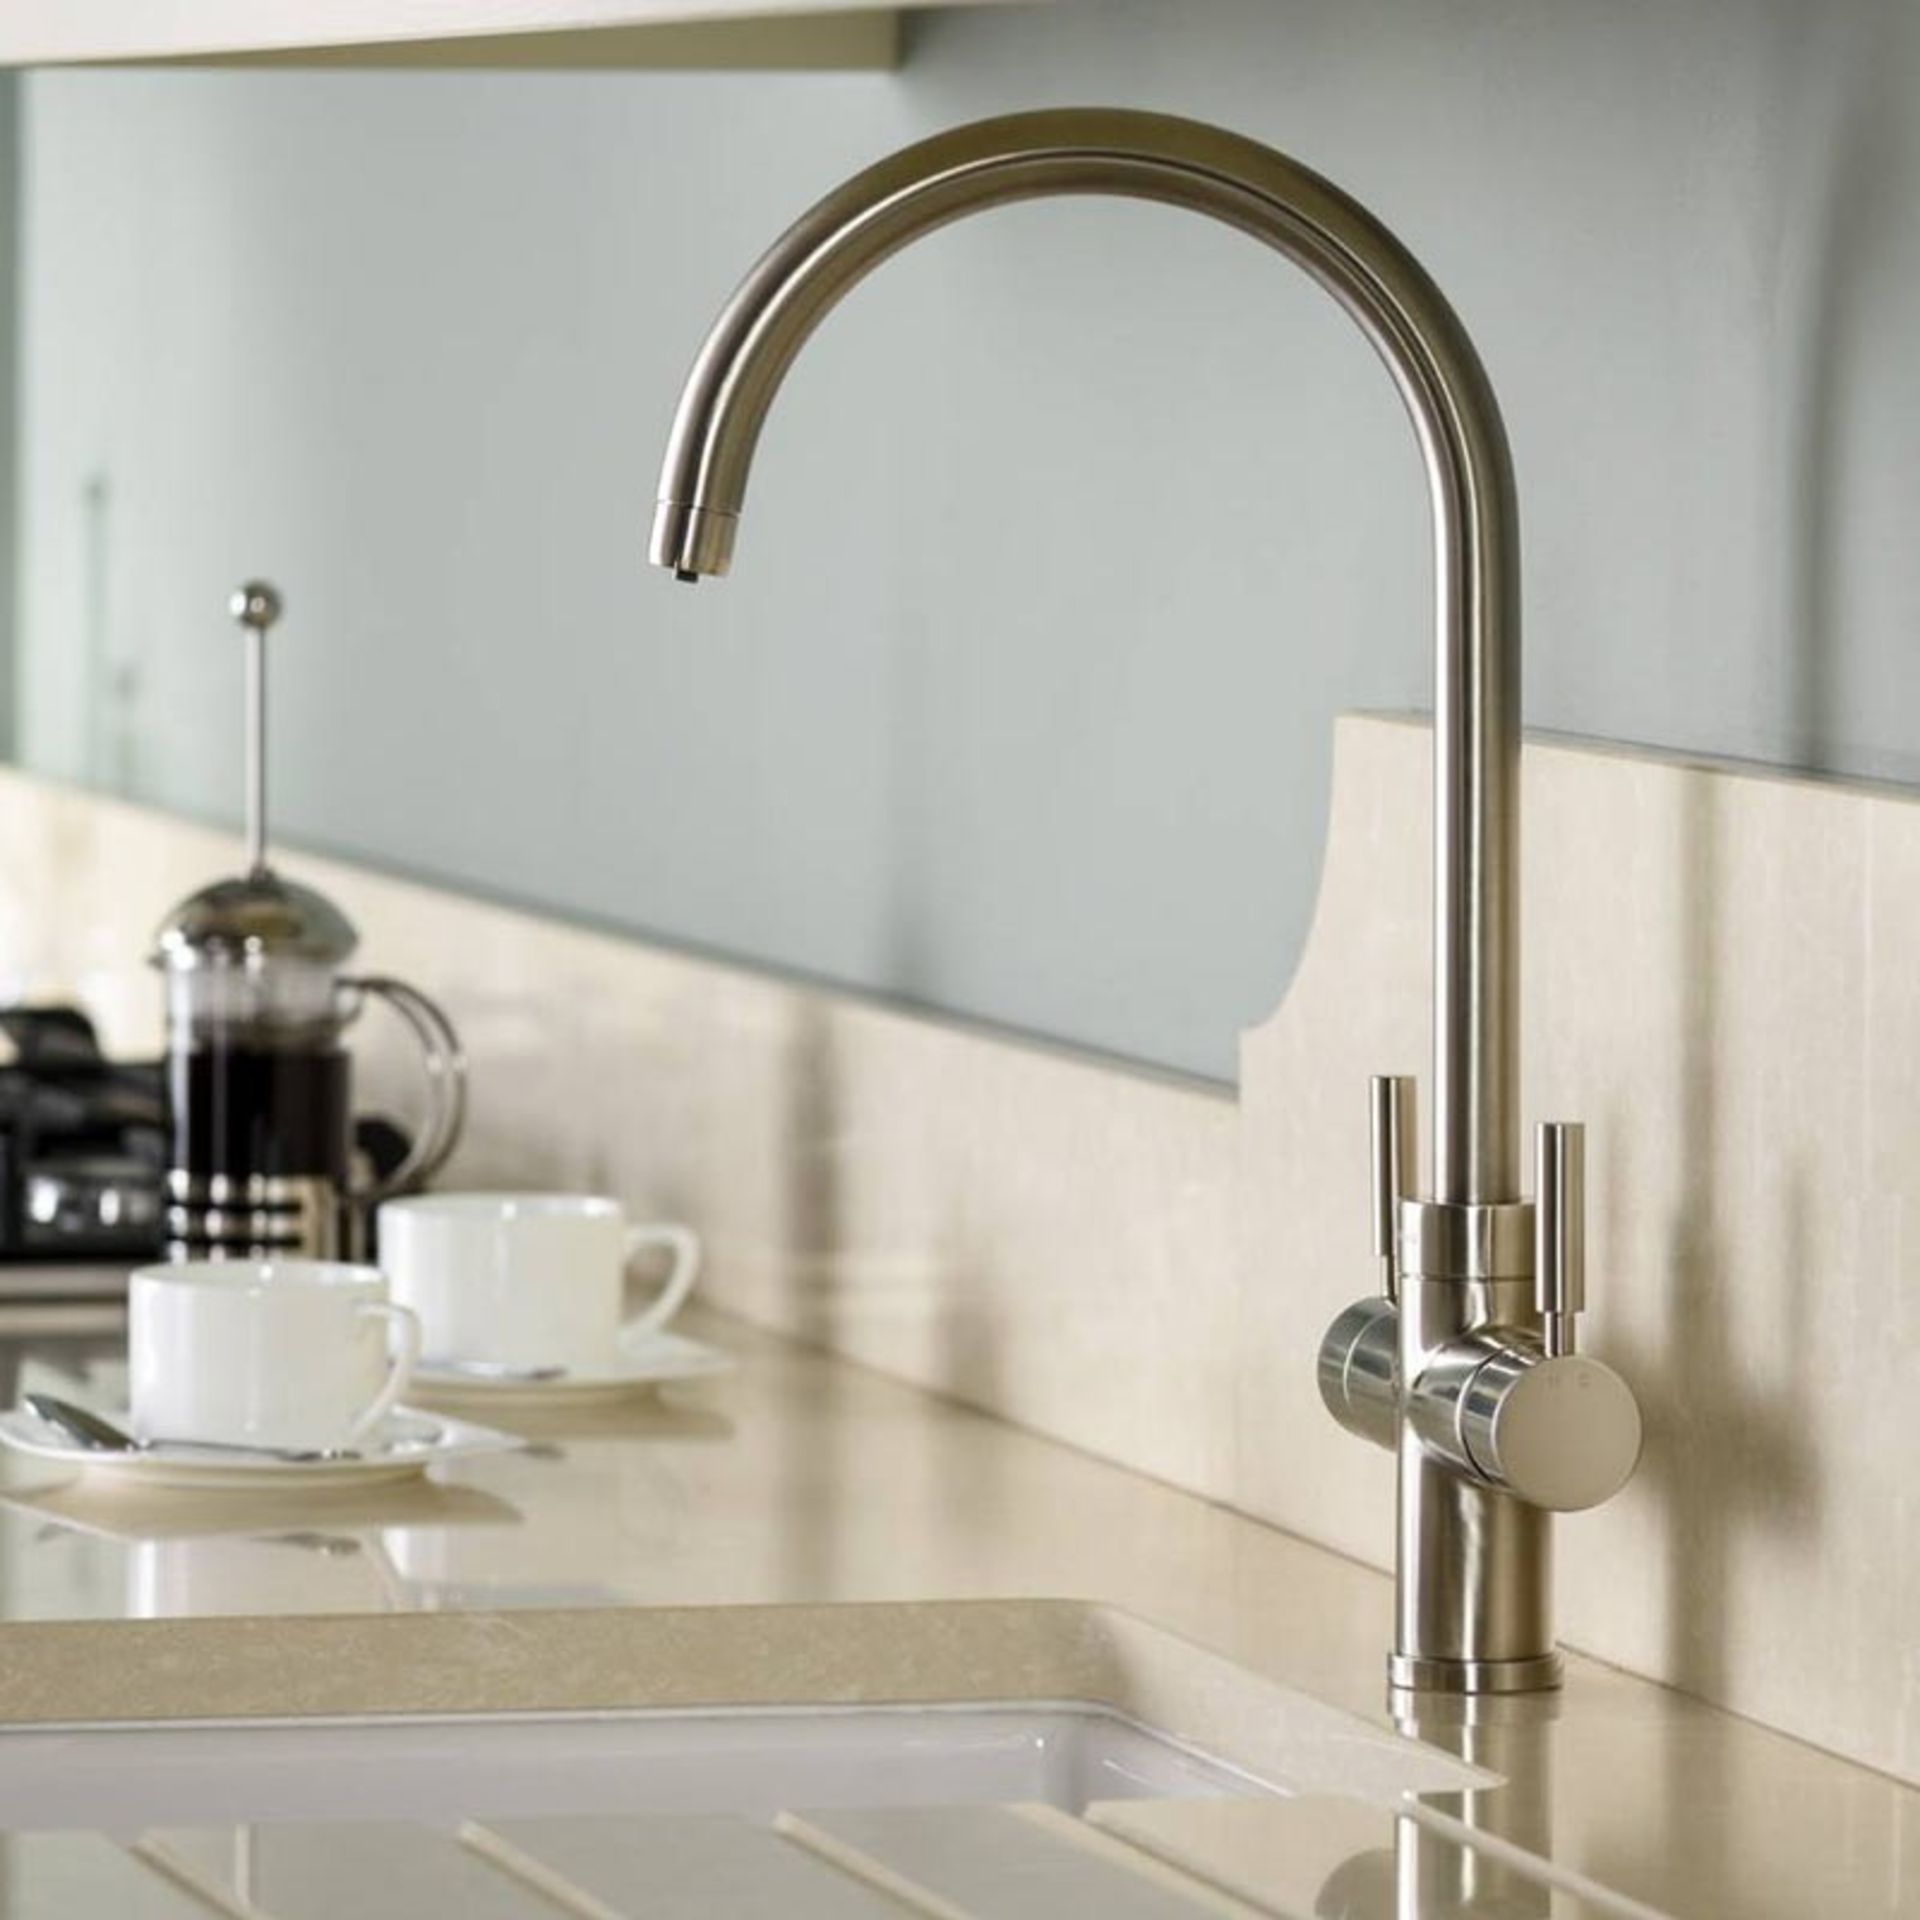 Proboil ‘3-In-1’ Swan Neck, Brushed Nickel Kitchen Tap. PCT3002RMC